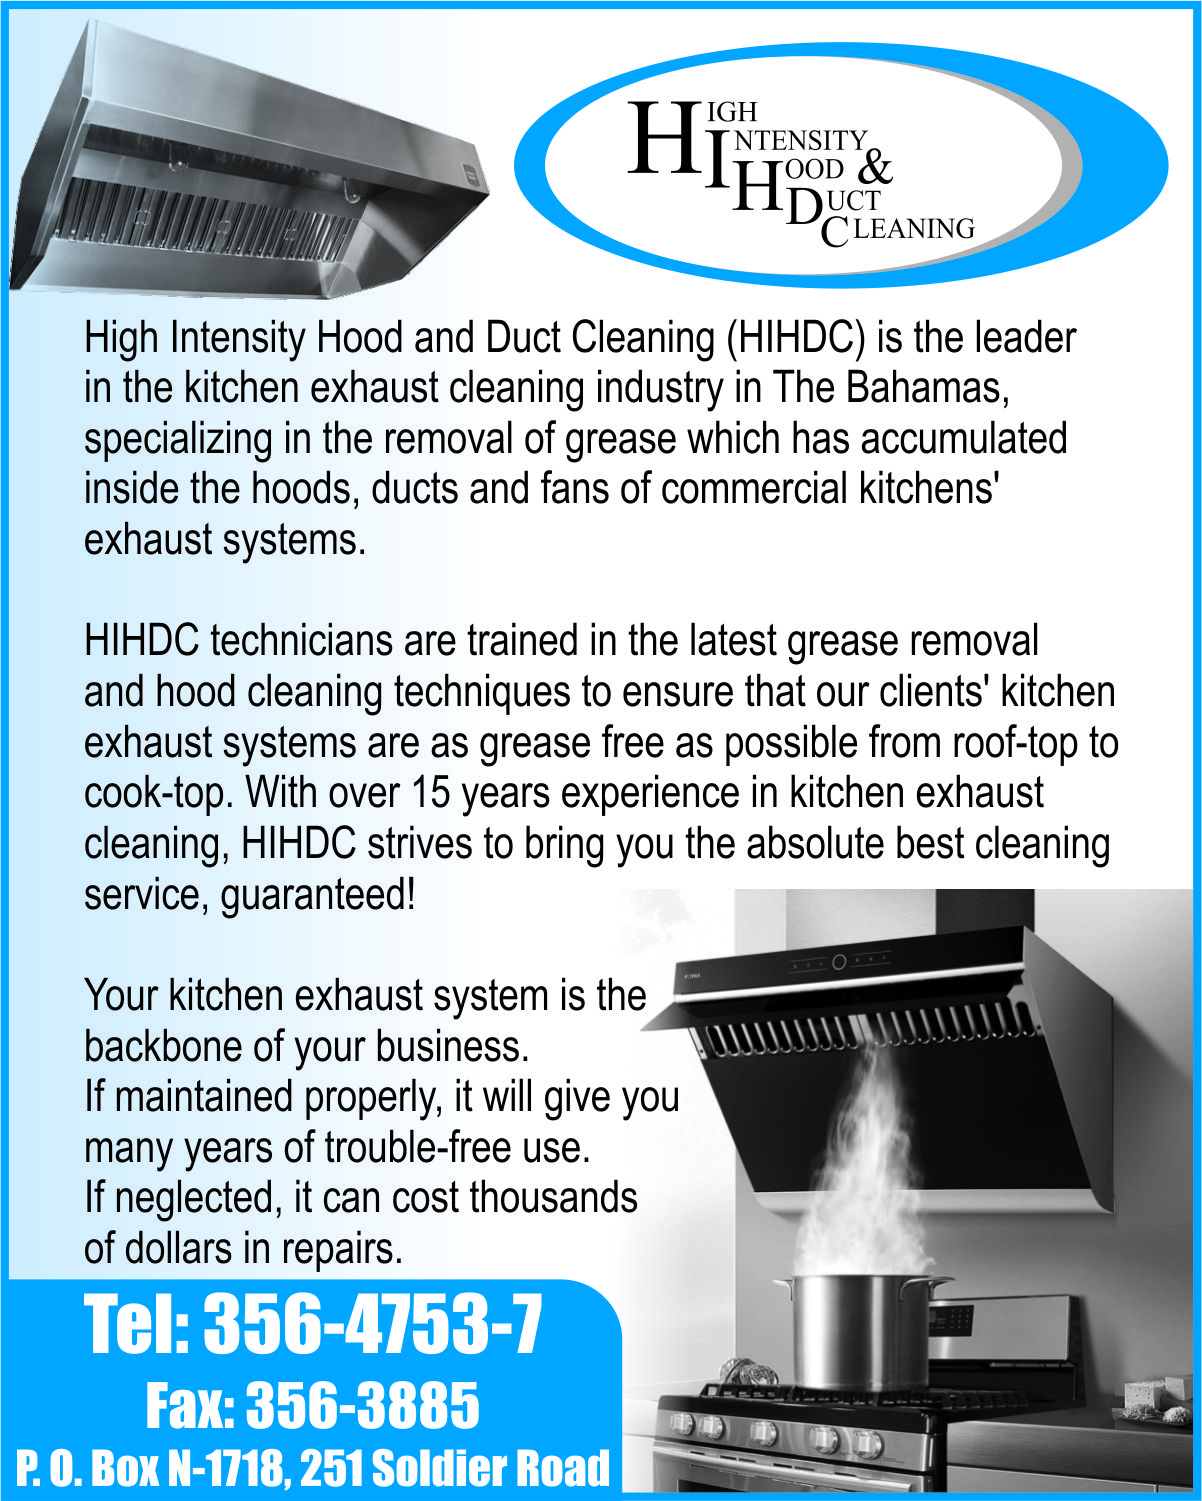 High Intensity Hood & Duct Cleaning - Kitchen Hood & Duct Cleaning